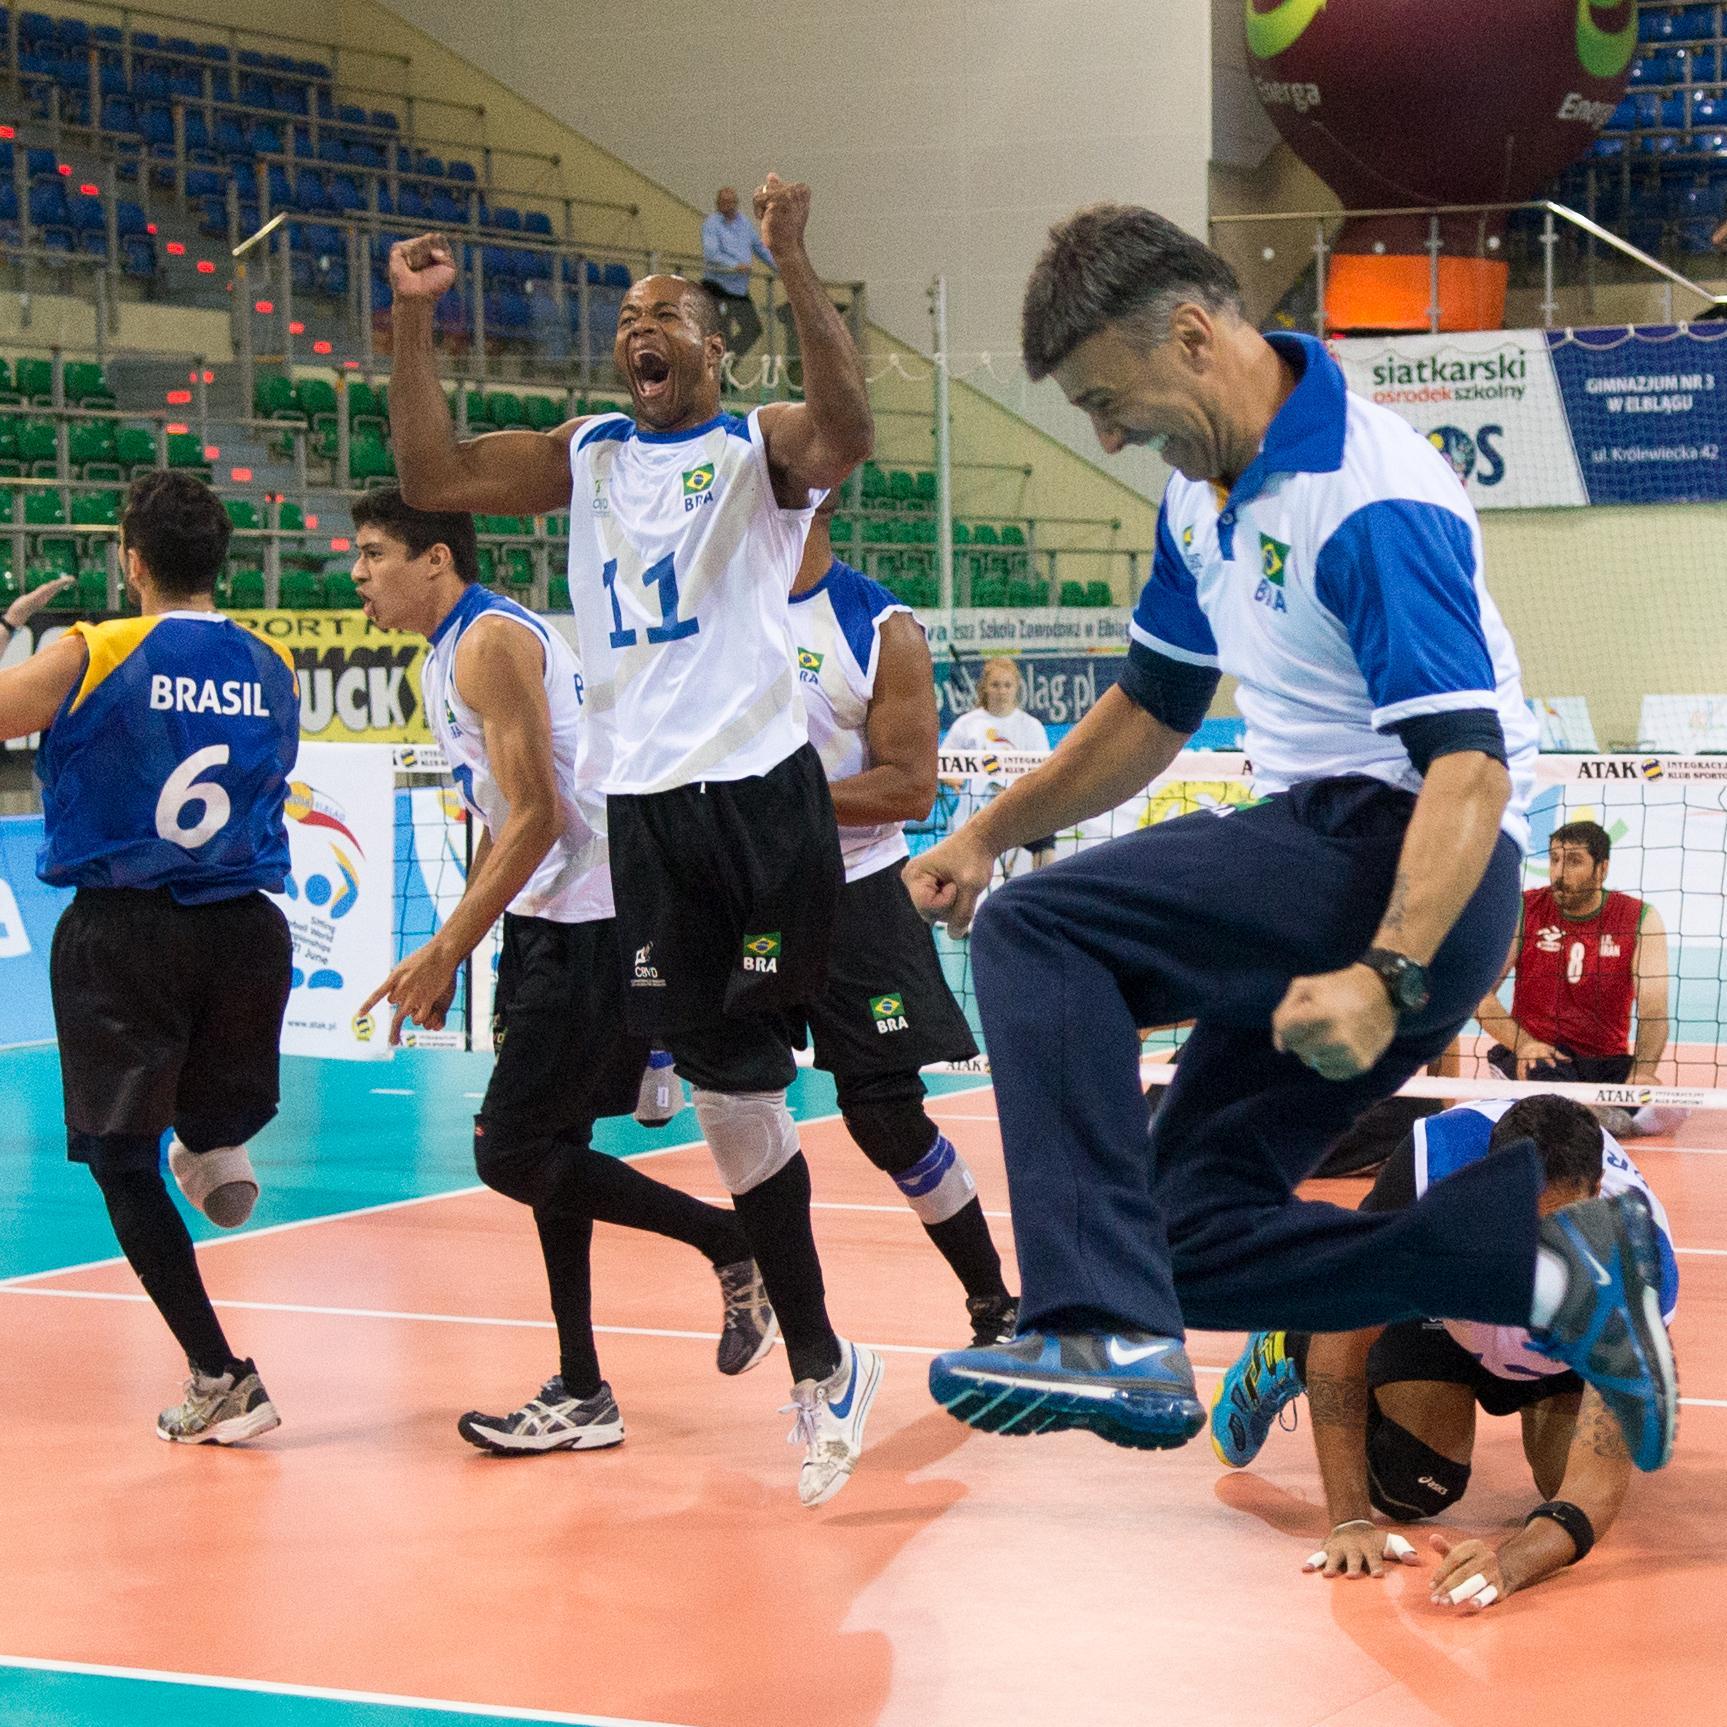 Sitting volleyball is a @Paralympic sport at @Rio2016. It is governed by @paravolley